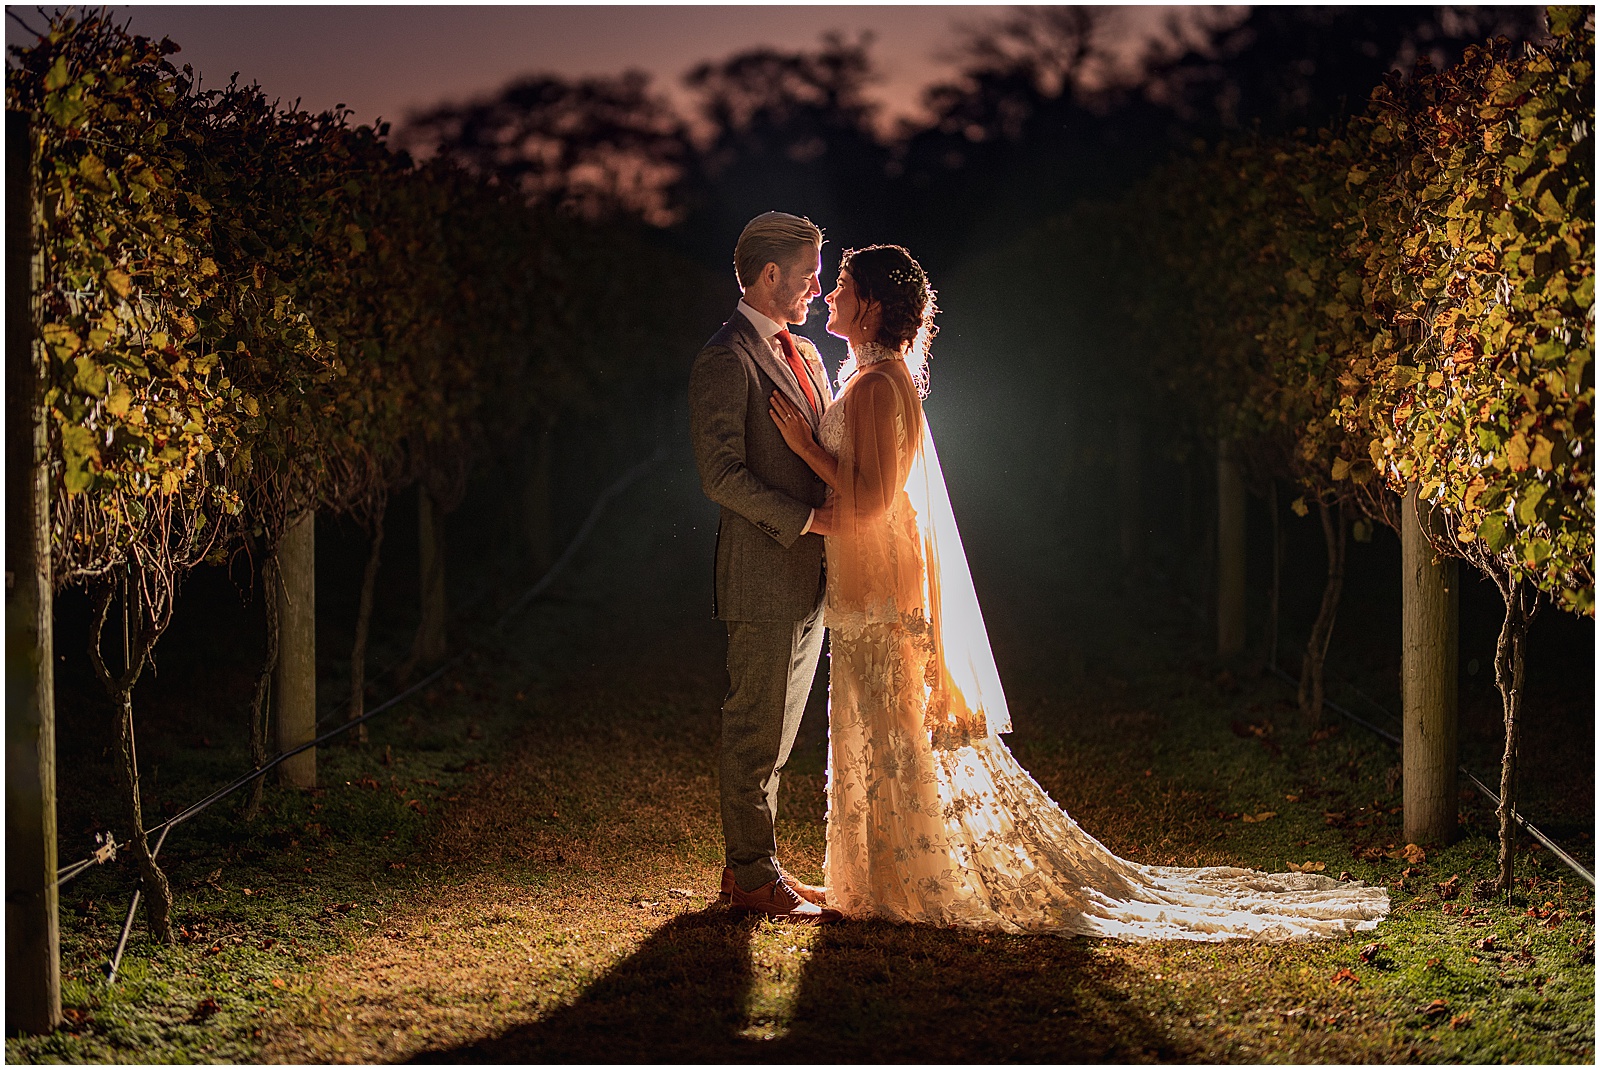 Sunset portrait of bride and groom at willow creek winery